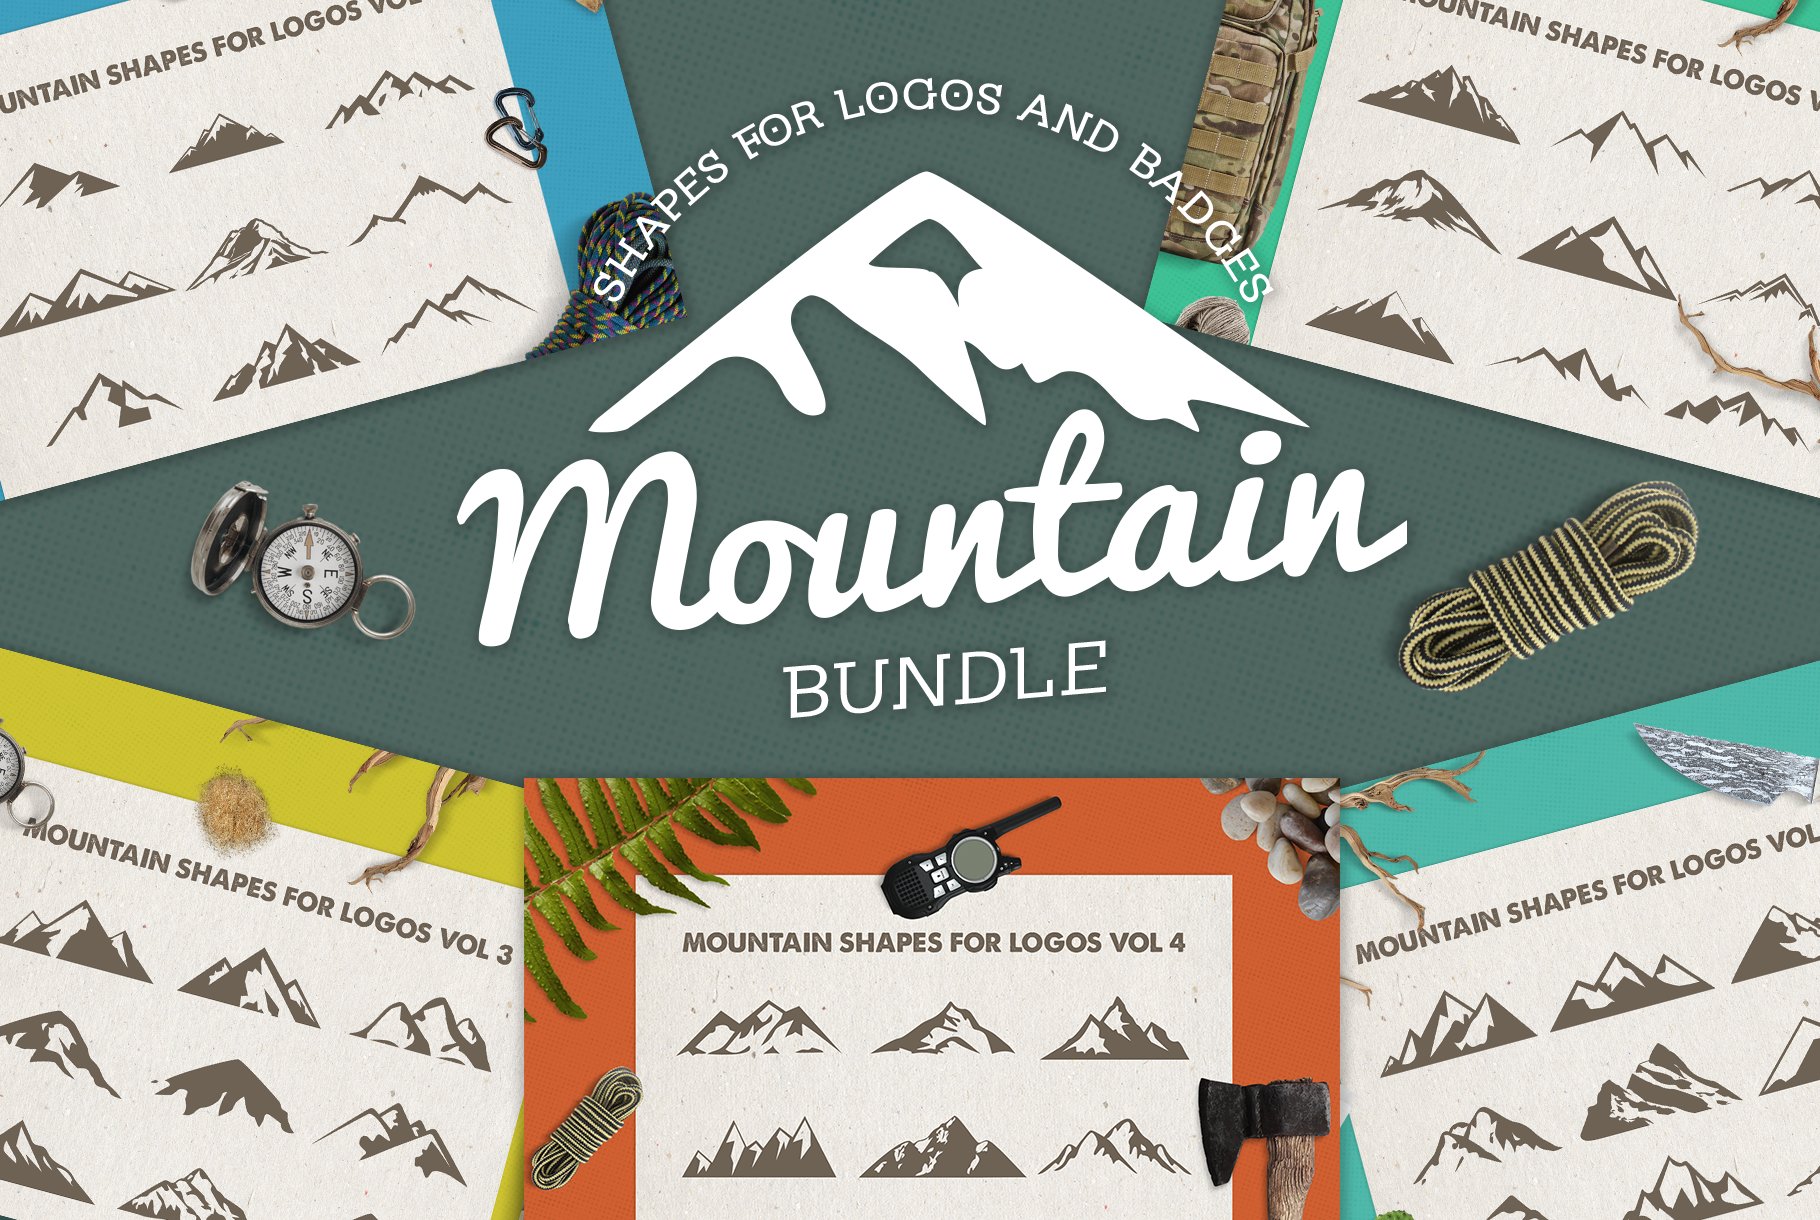 Mountain Shapes For Logos Bundlepreview image.